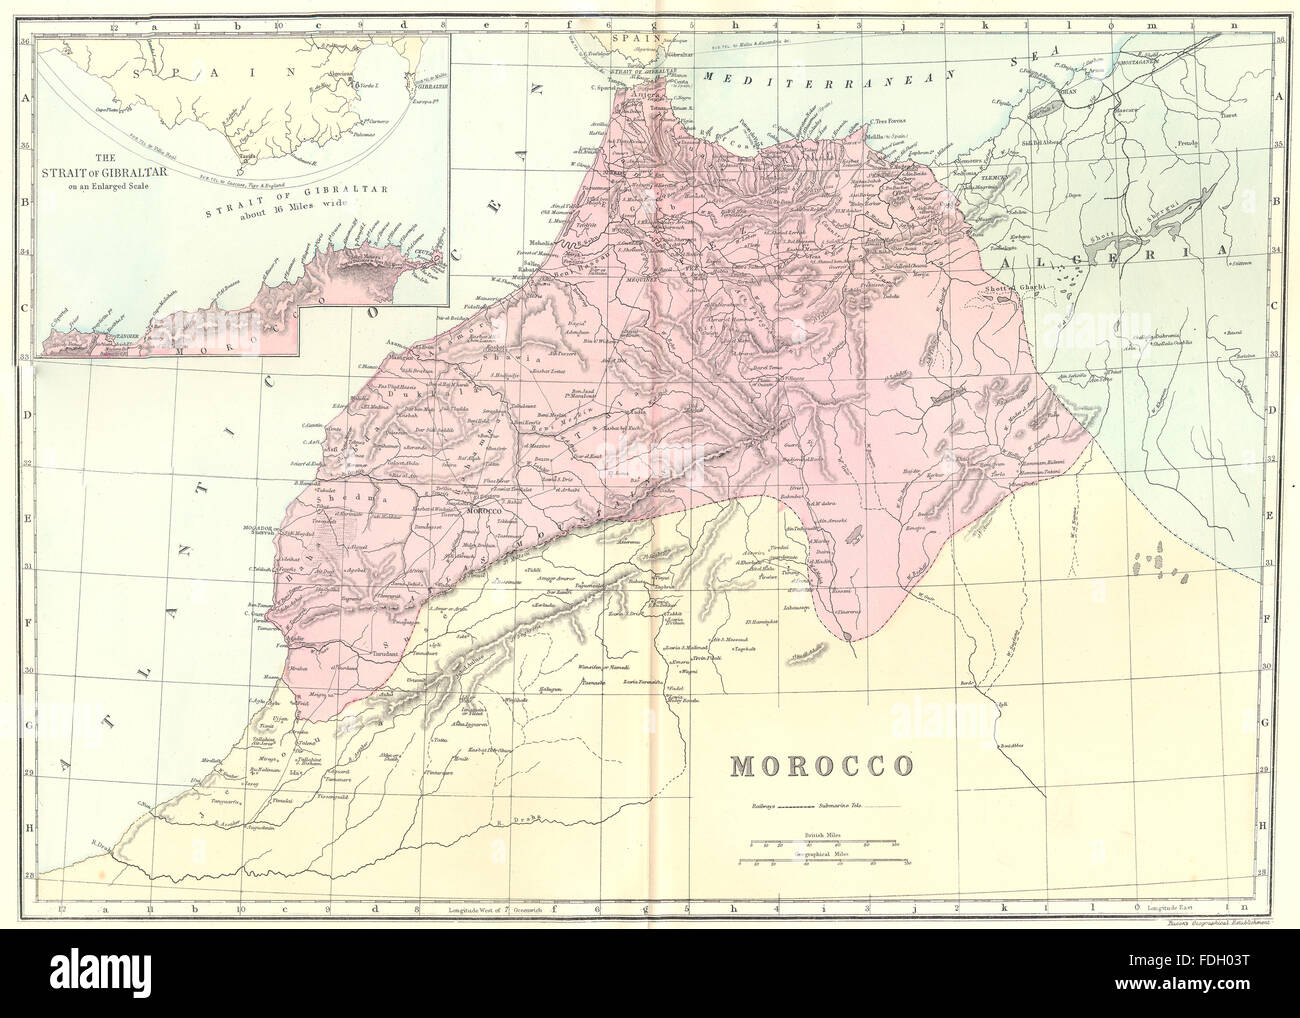 MOROCCO: Inset map of the Strait of Gibraltar. Bacon, 1895 Stock Photo